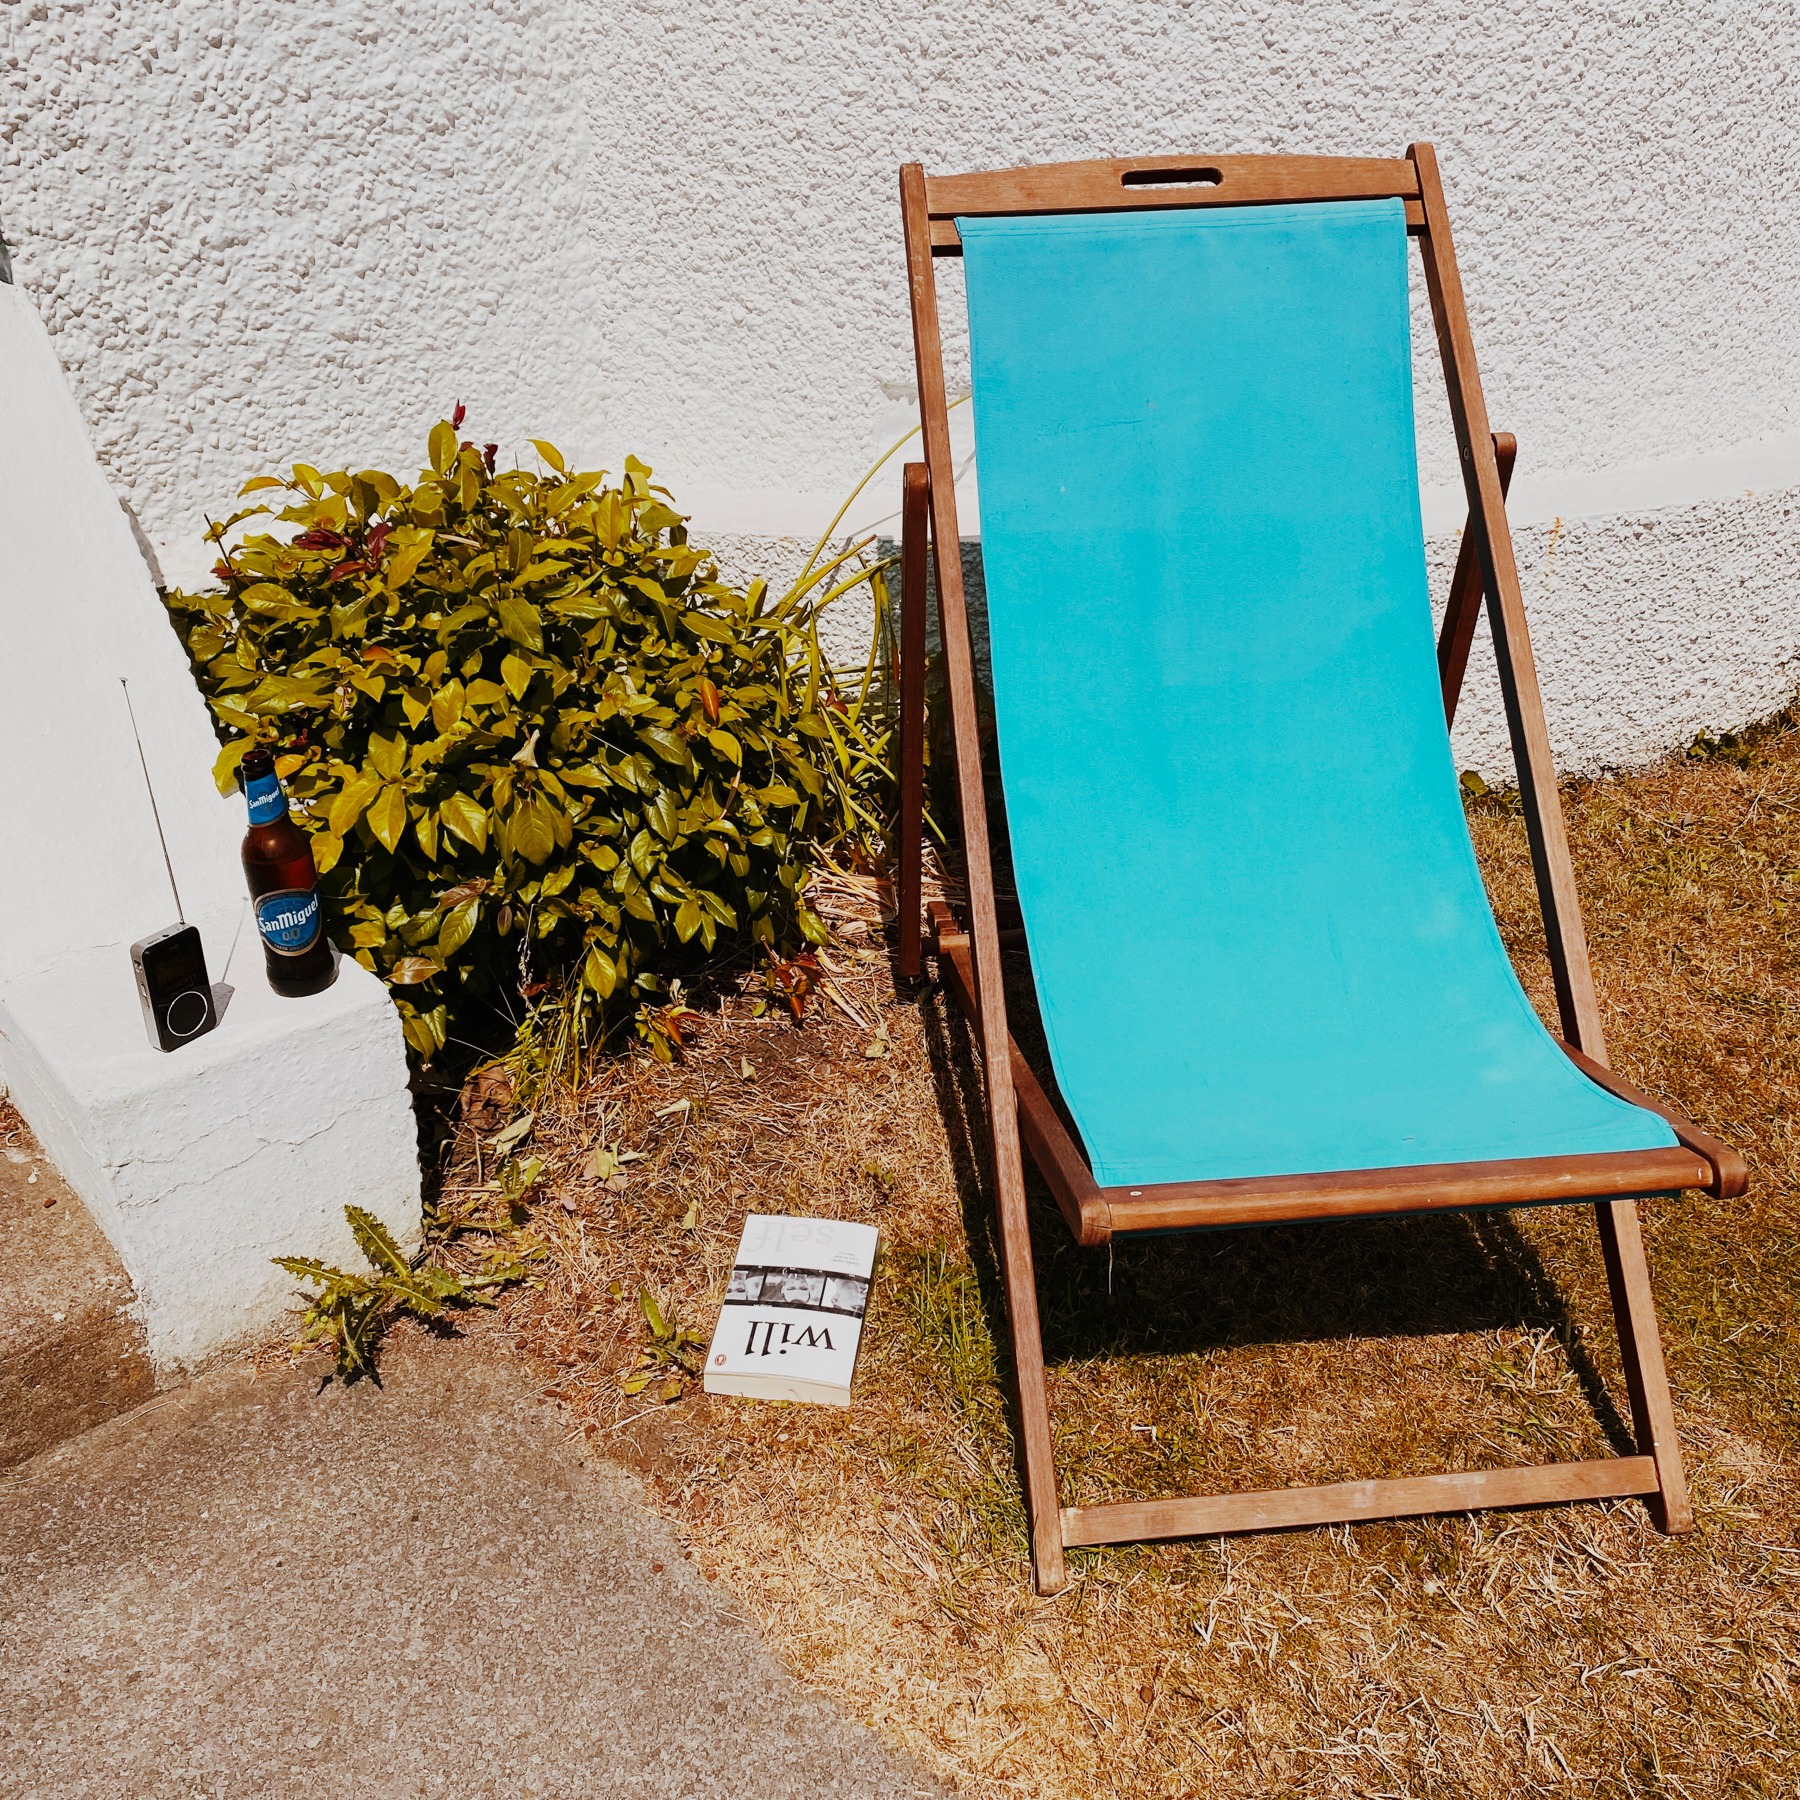 Bright blue deckchair on grass next to a book, bottle of beer and small radio